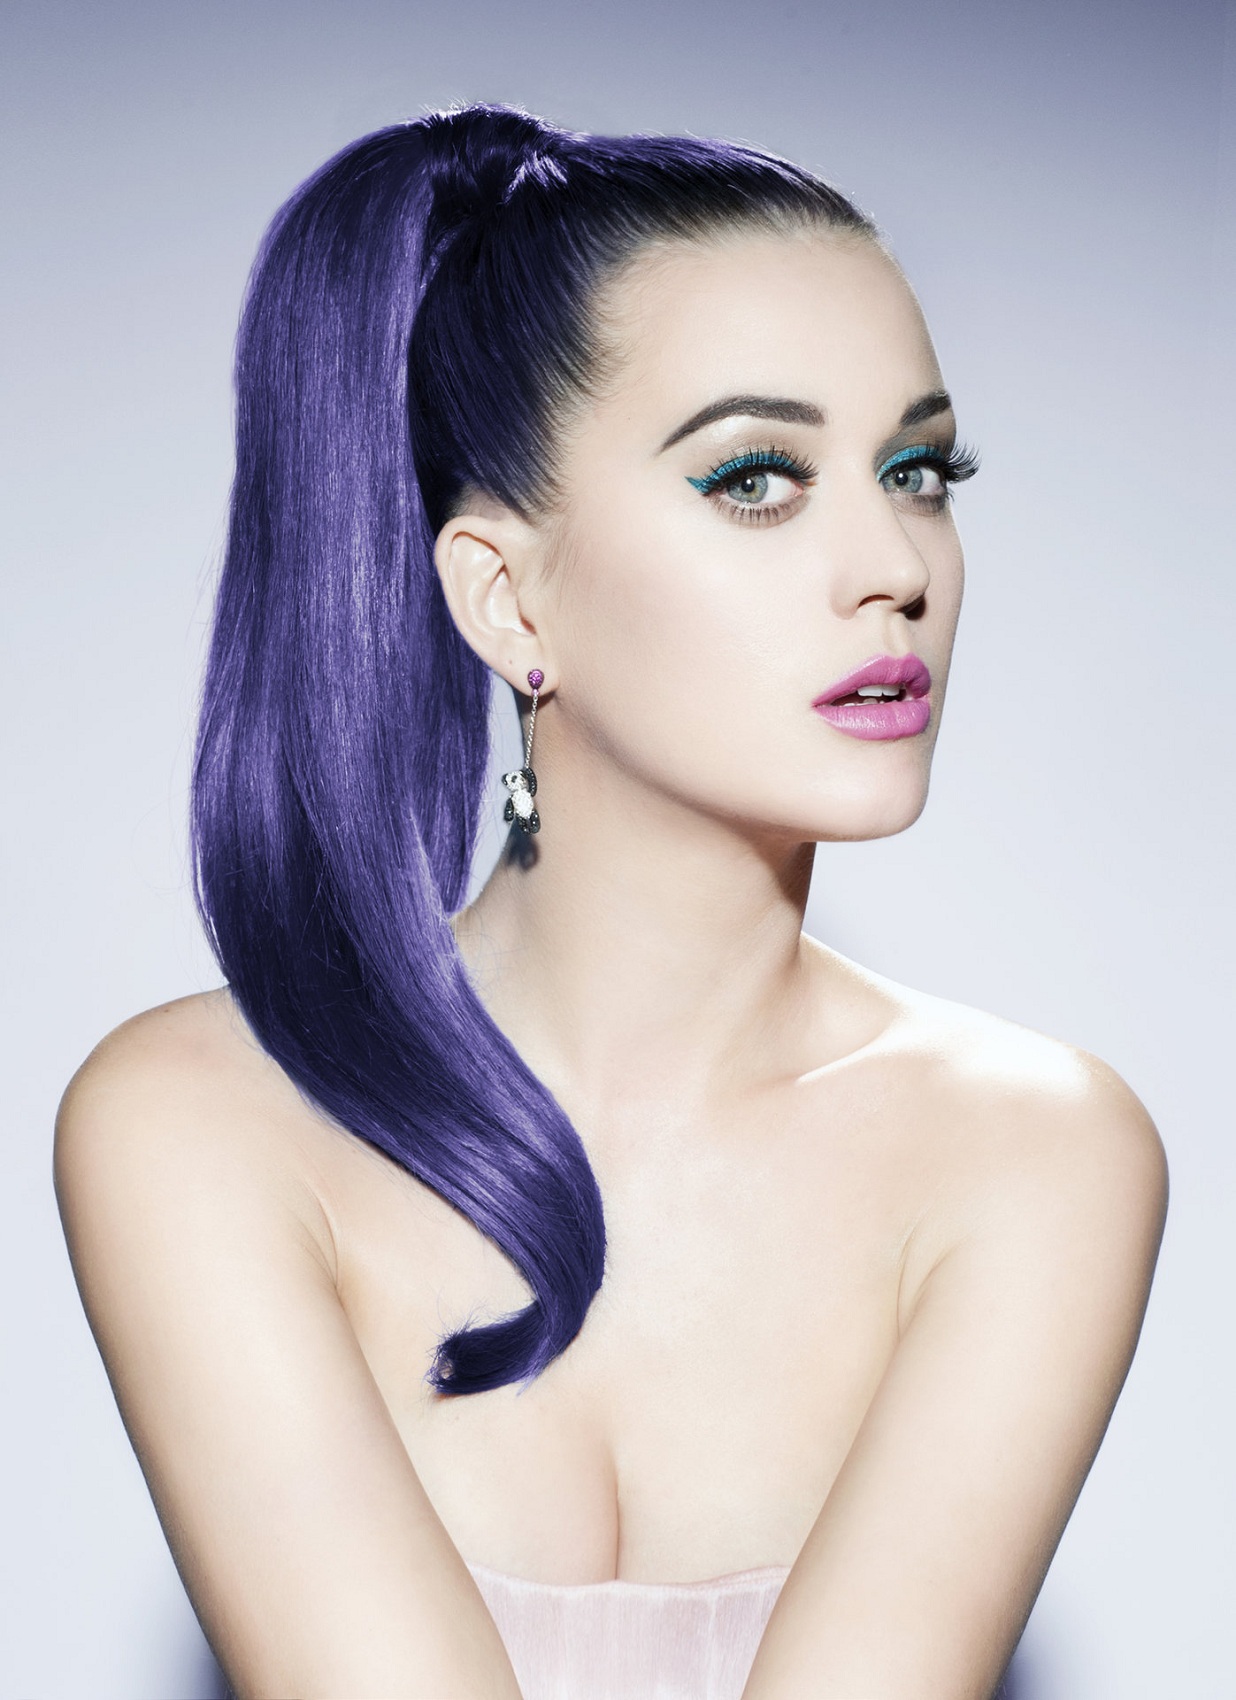 Katy Perry sexys Wallpapers